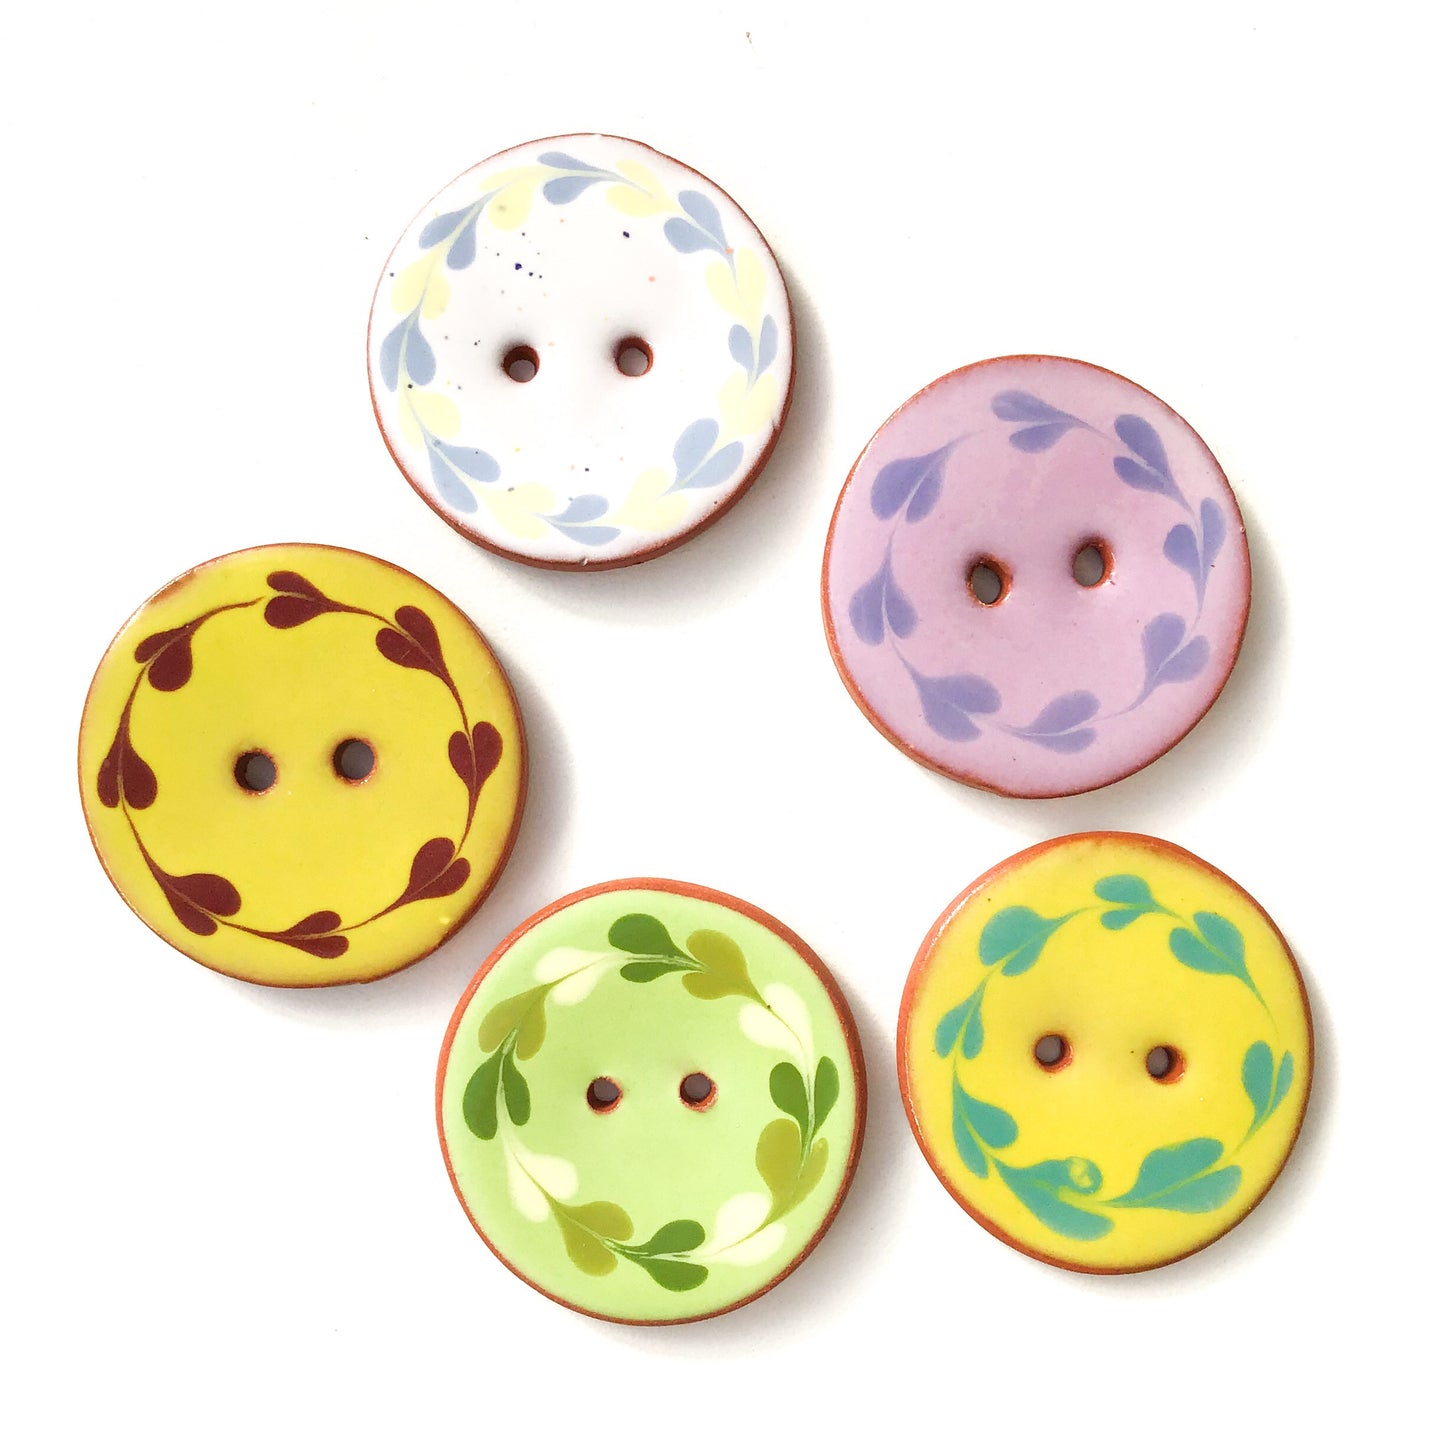 Colorful Wreath Clay Buttons - Decorative Ceramic Buttons - 1 3/8" (ws-53)